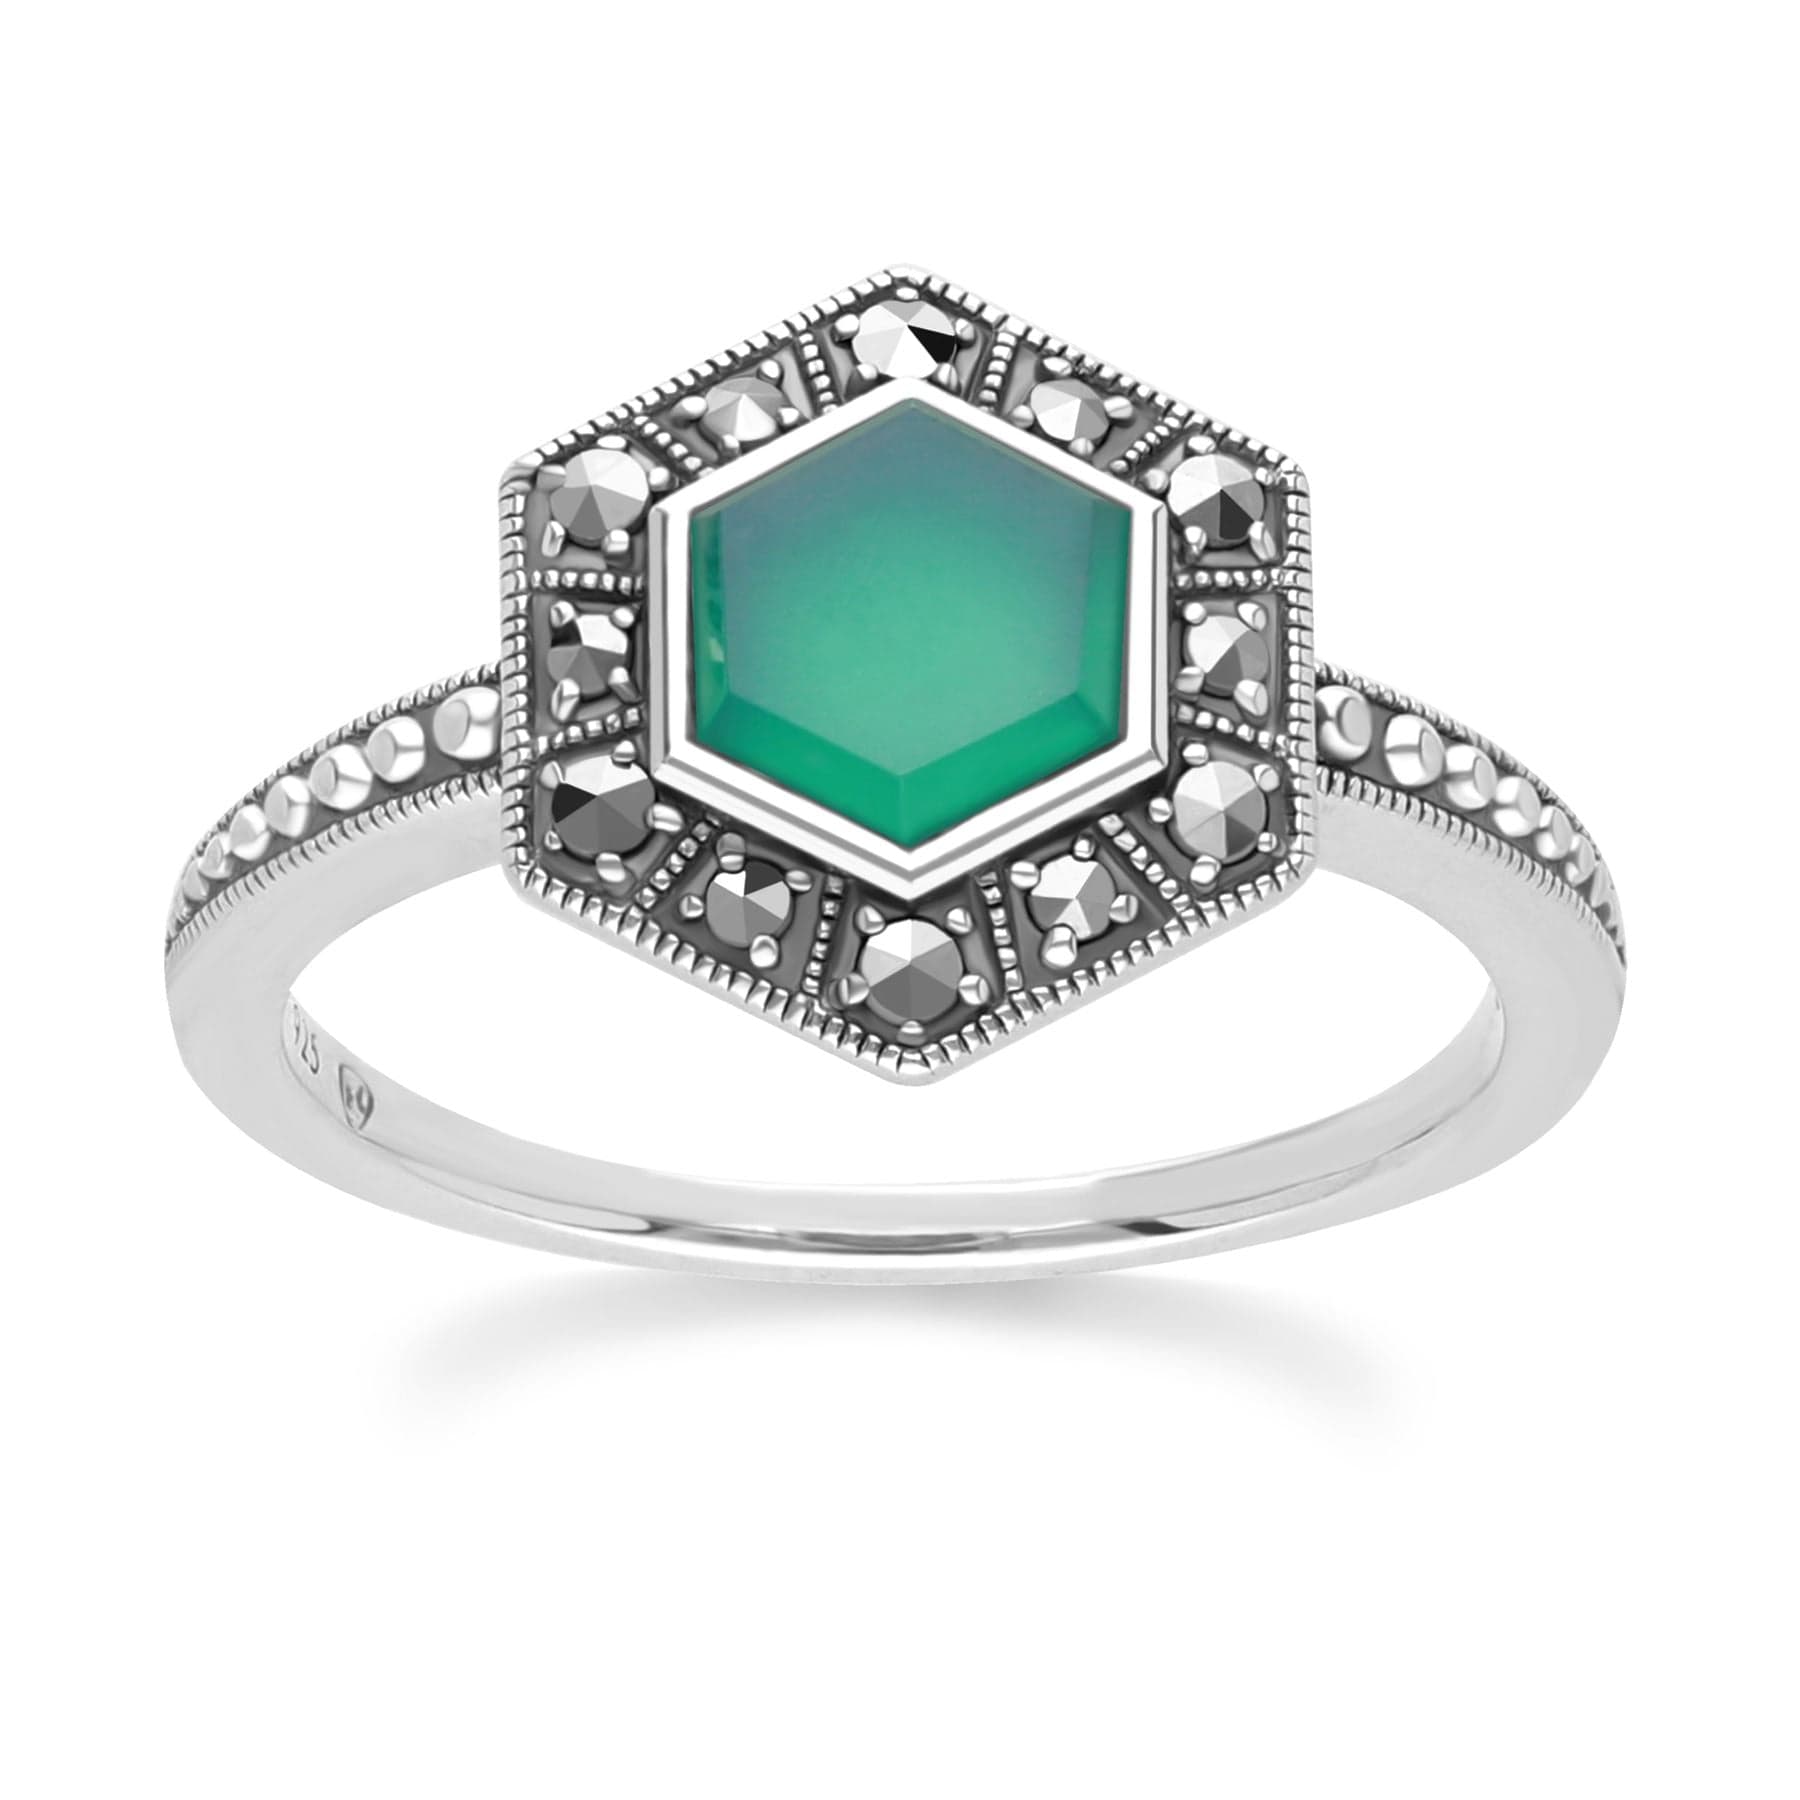 Art Deco Style Hexagon Chalcedony and Marcasite Ring in Sterling Silver 214R641801925 